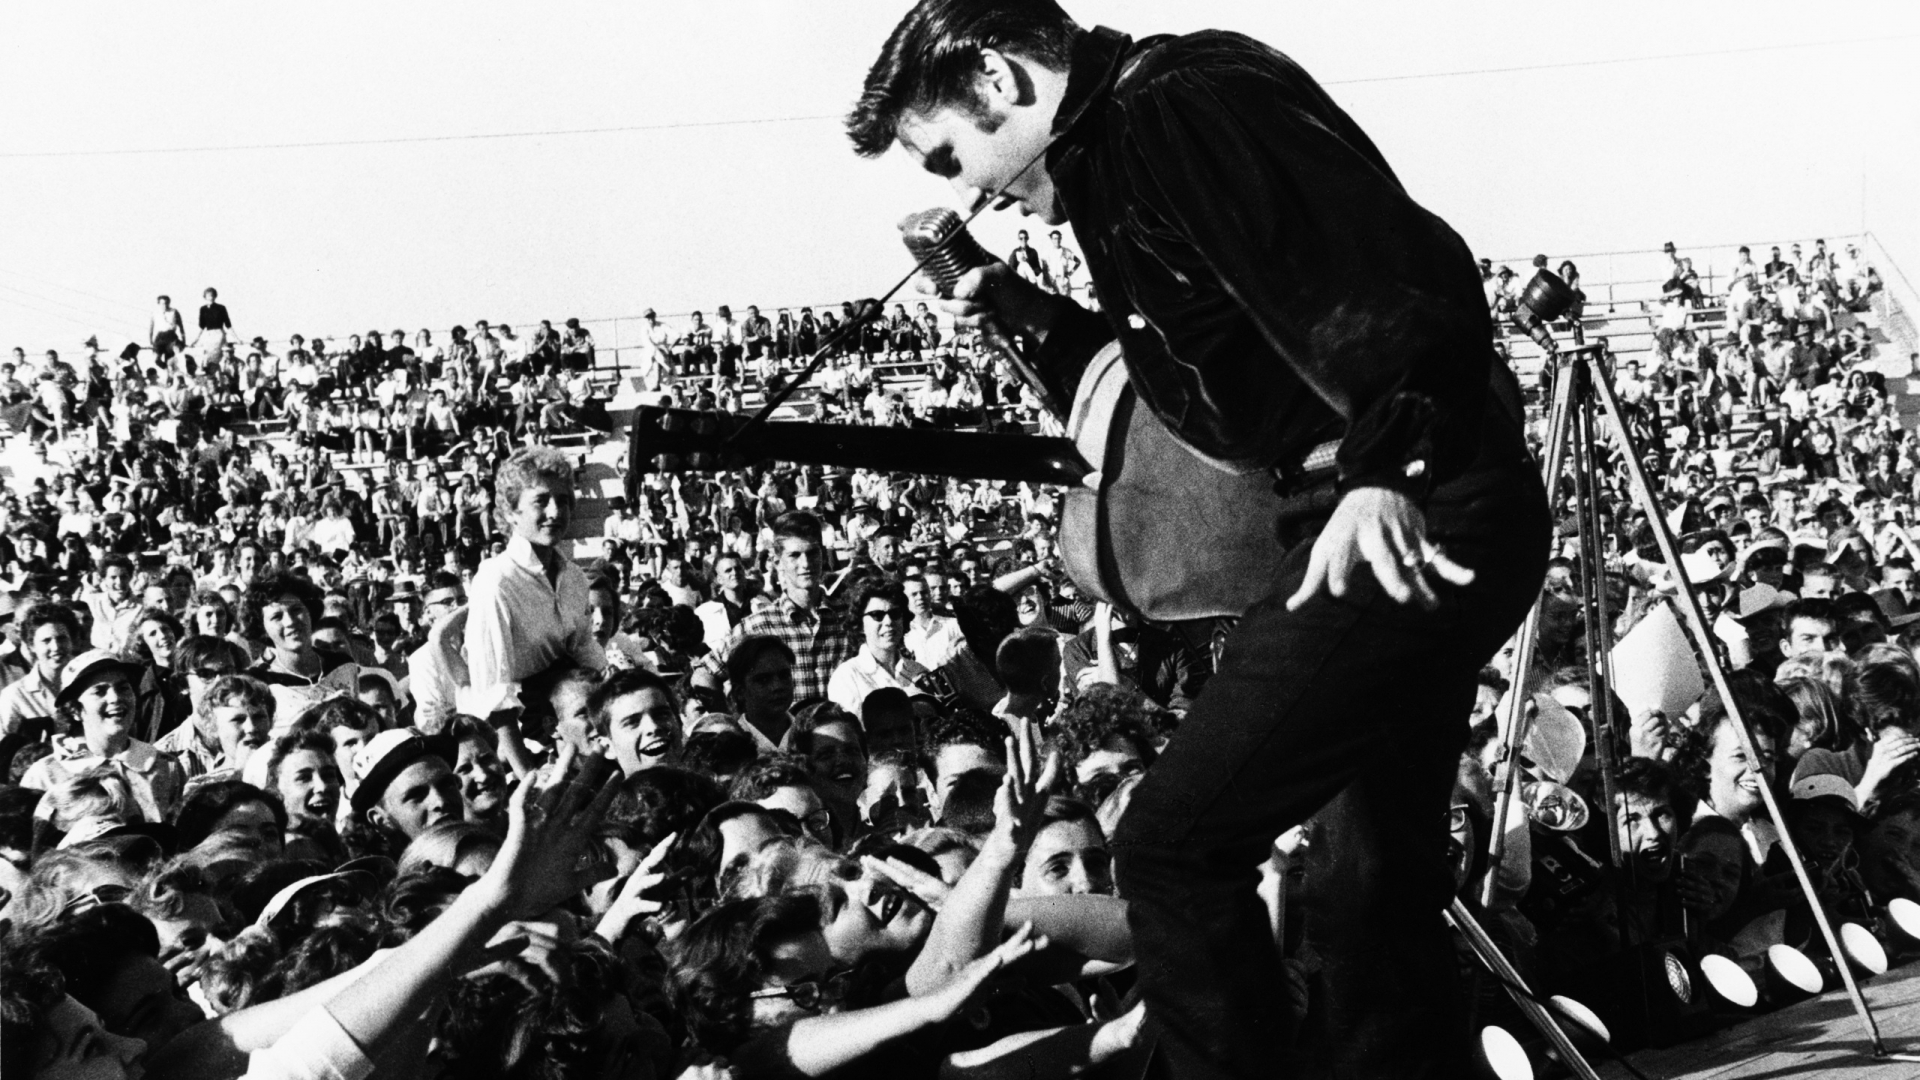 Elvis Presley on The Stage for 1920 x 1080 HDTV 1080p resolution